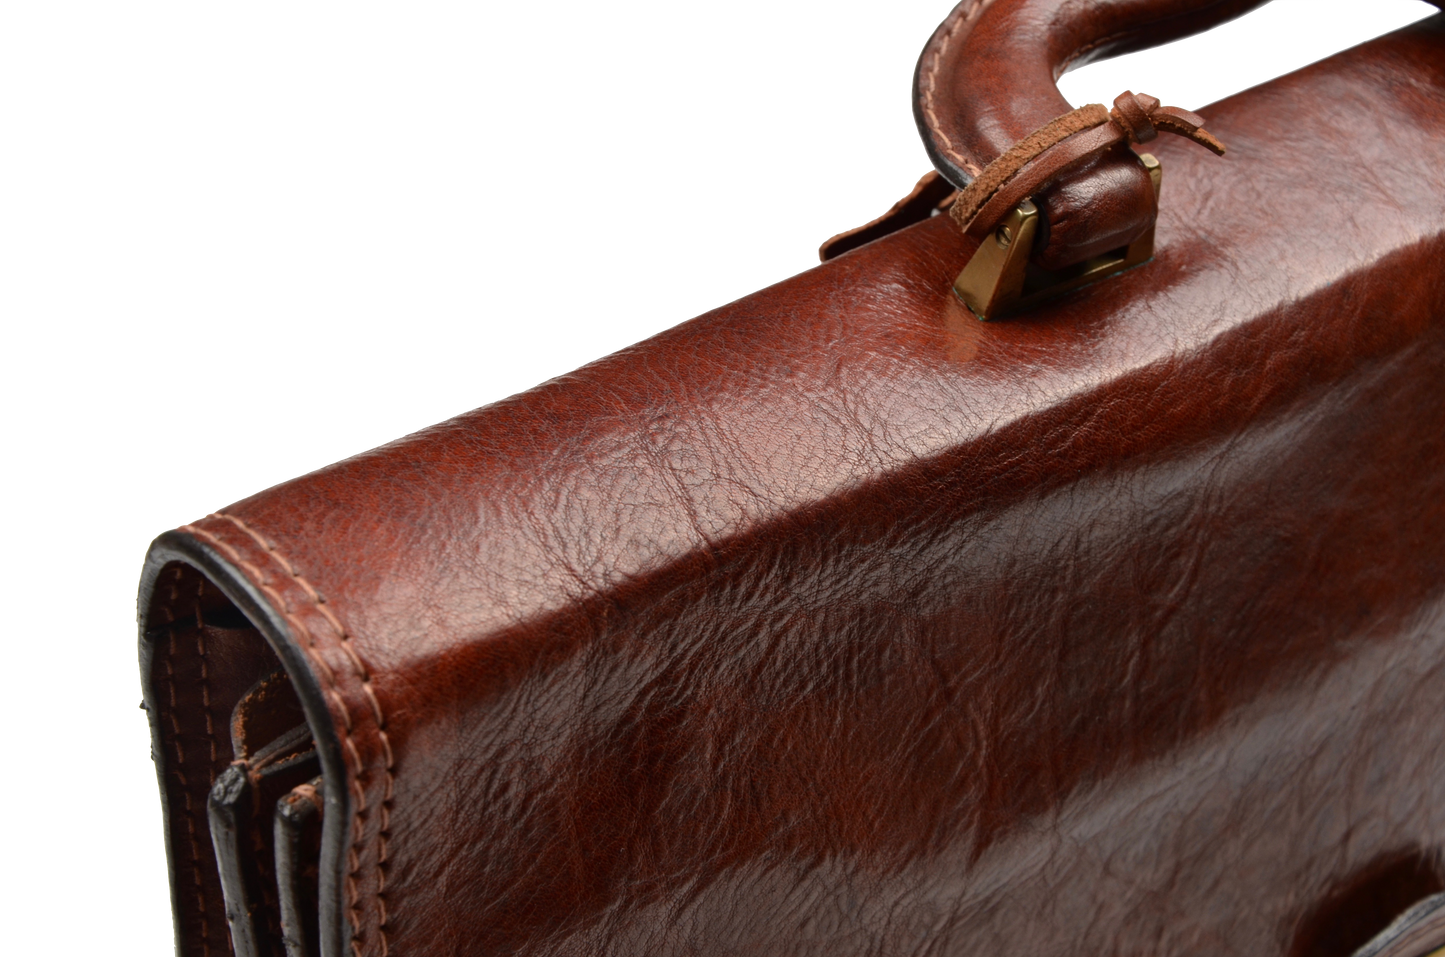 The Bridge Firenze Leather Briefcase/Business Bag - Brown